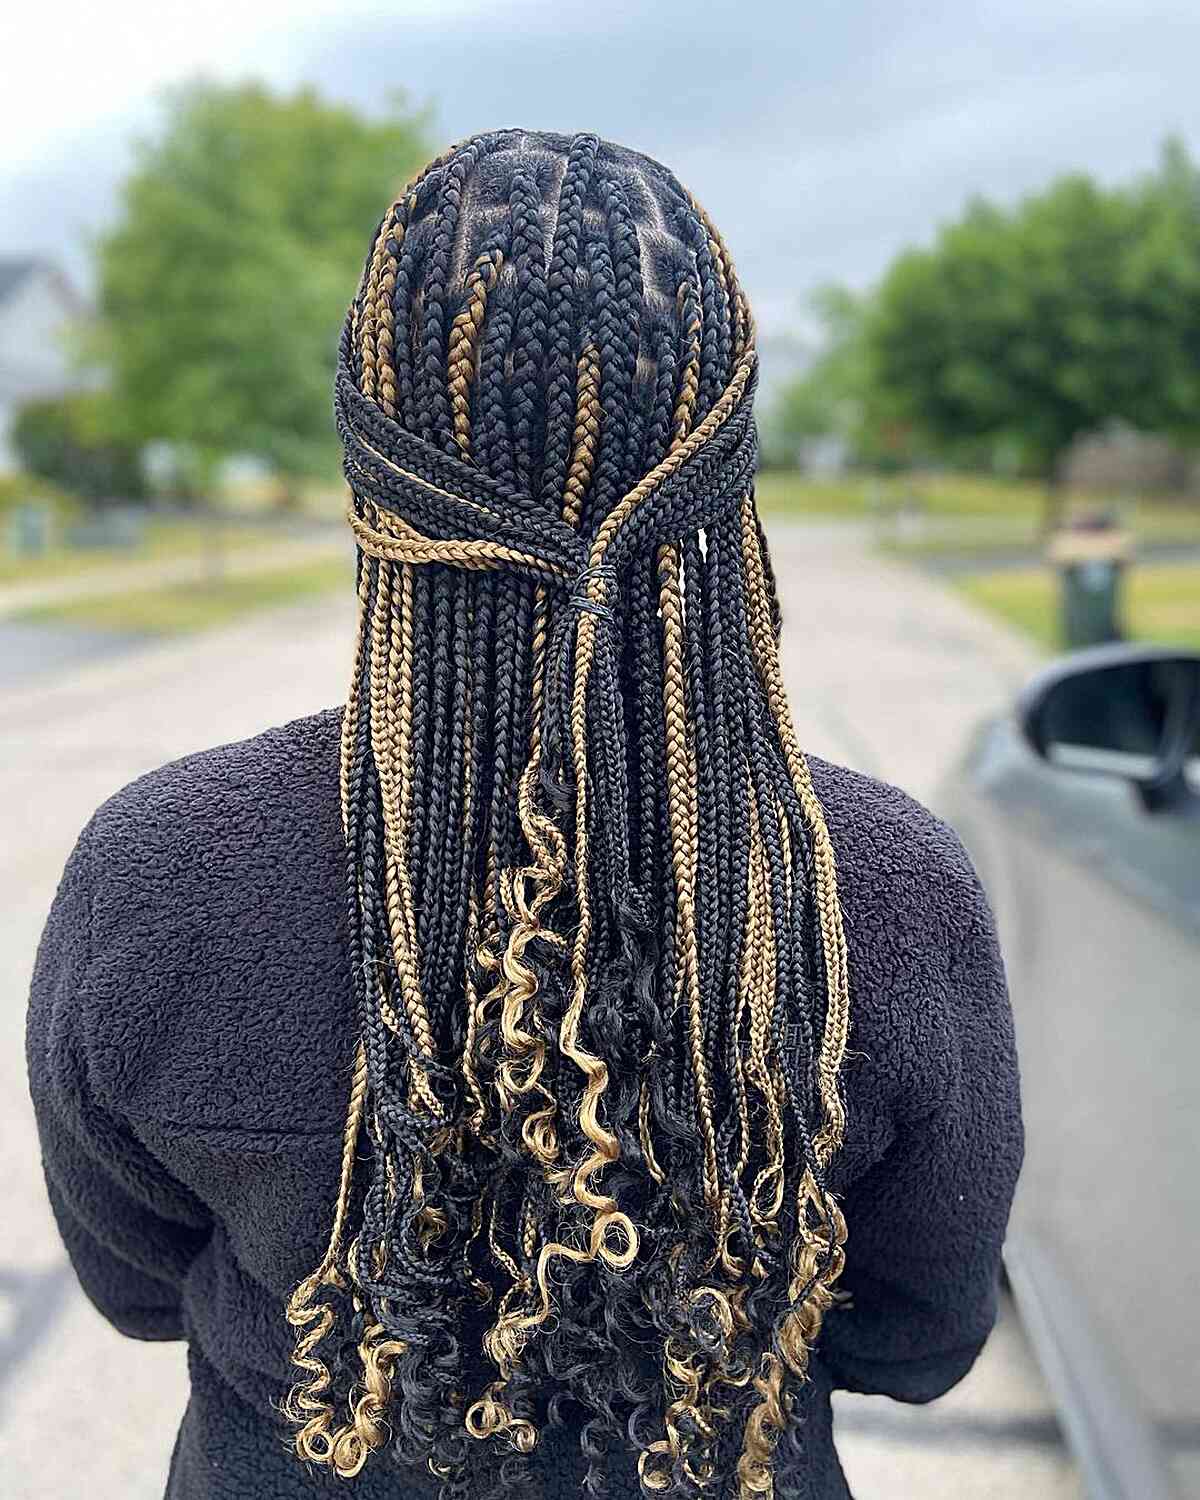 Mid-Sized Knotless Black Braids with Blonde Pieces